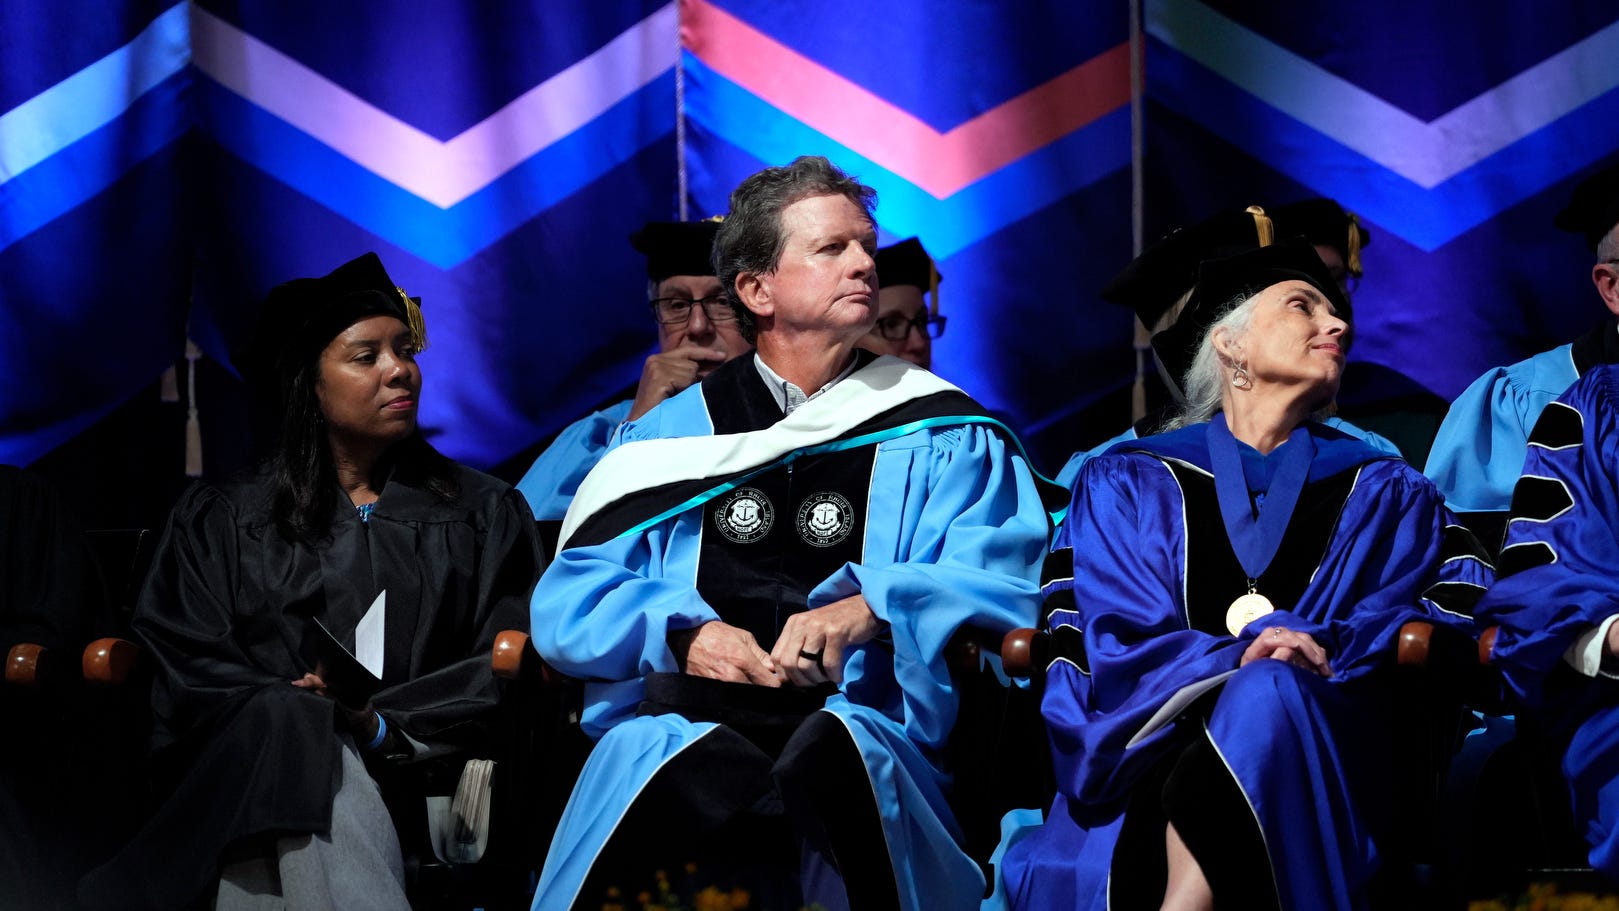 Marc Parlange, man from Down Under, inaugurated as URI's 12th president